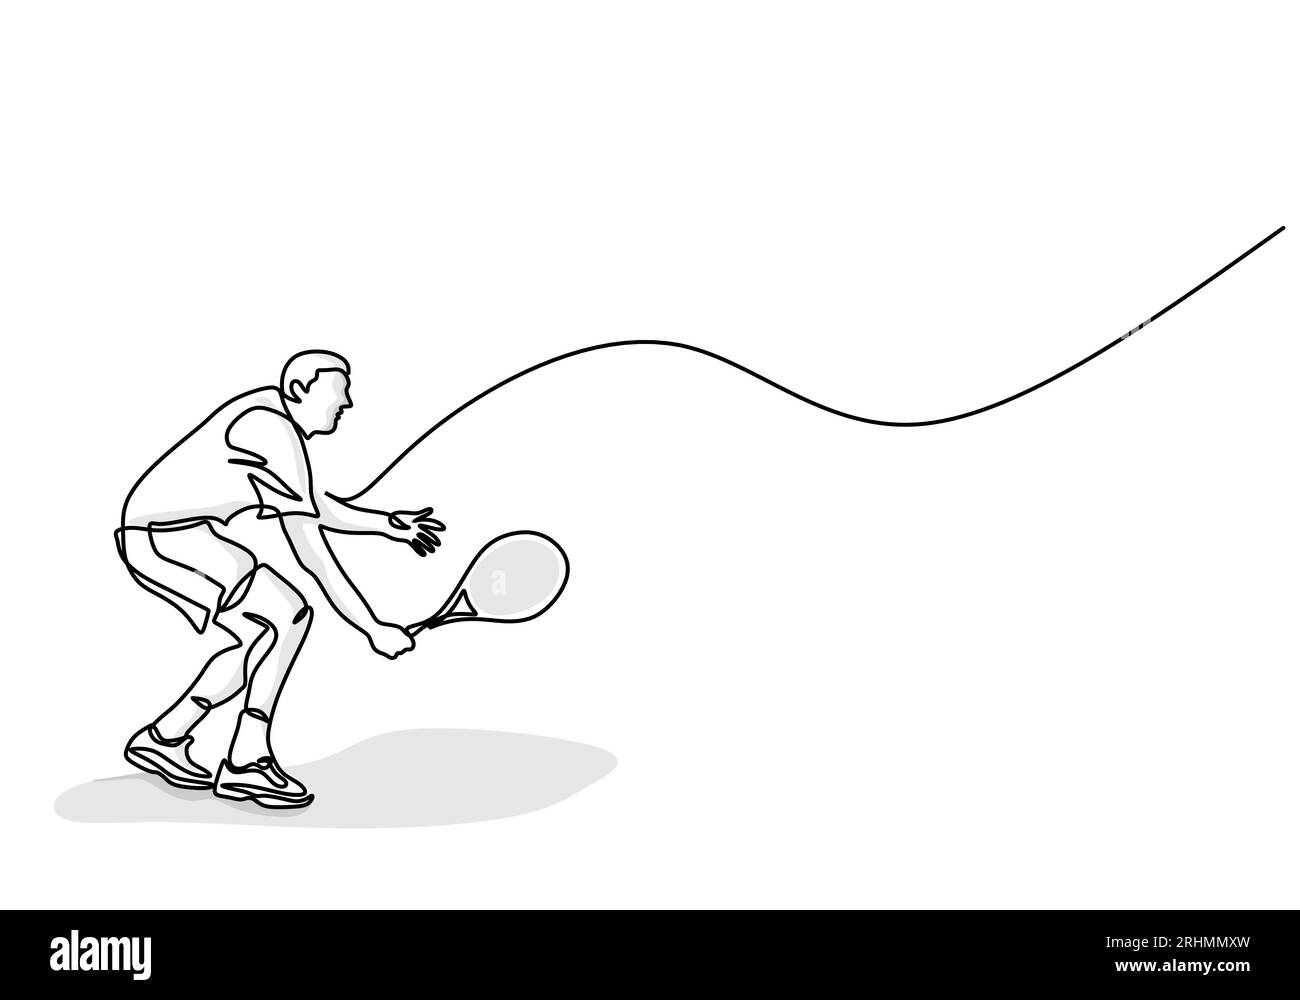 Tennis Player Minimalist Vector Illustration, Athlete Engaged in Tennis Game Stock Vector